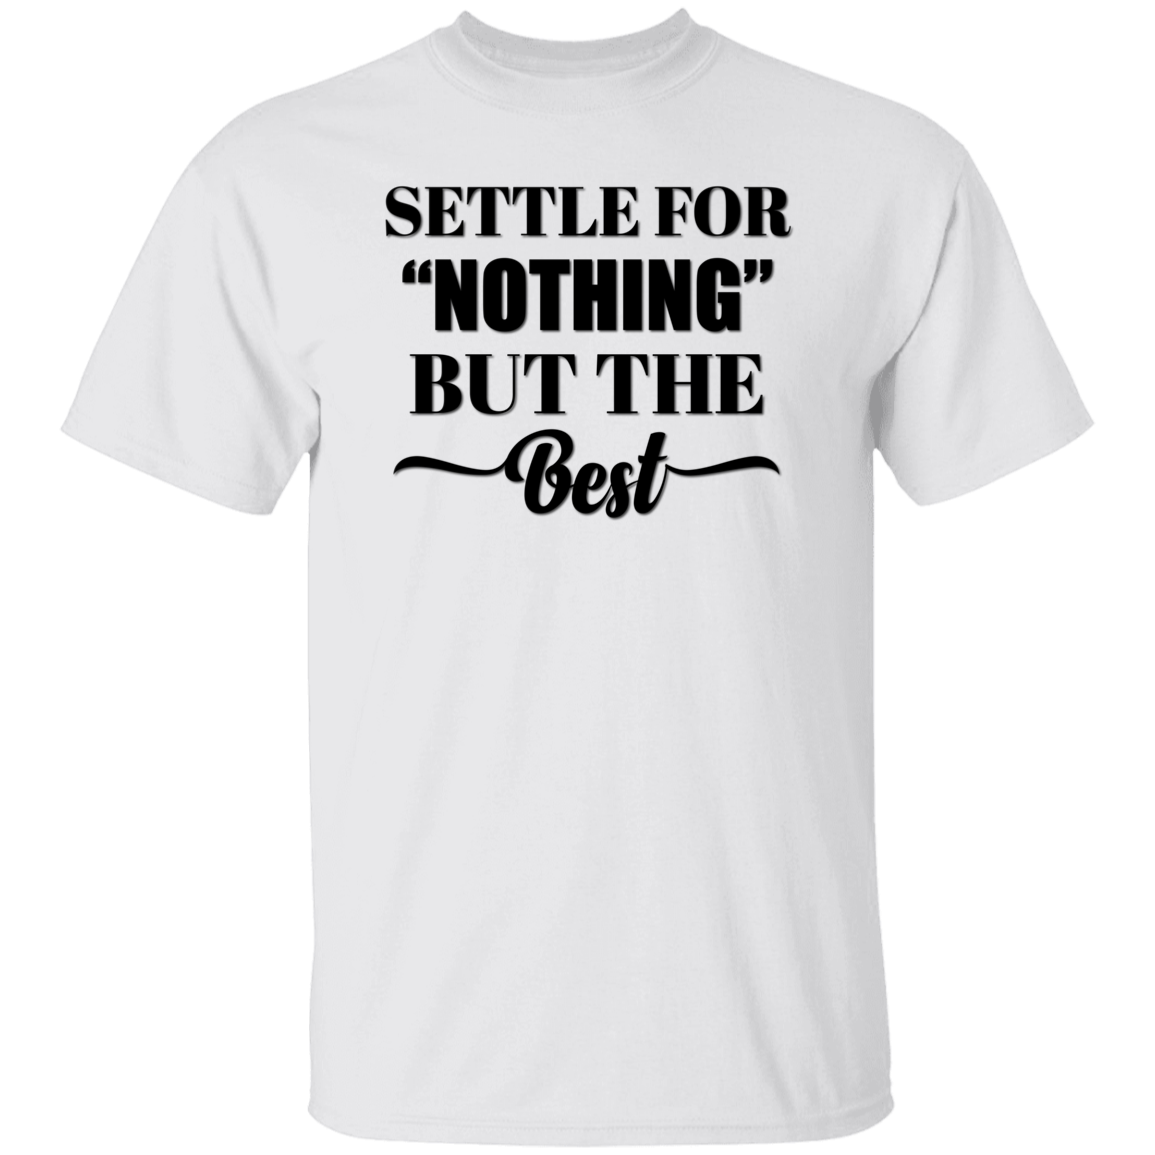 SETTLE FOR NOTHING BUT THE BEST   T-Shirt (MORE COLOR OPTIONS)